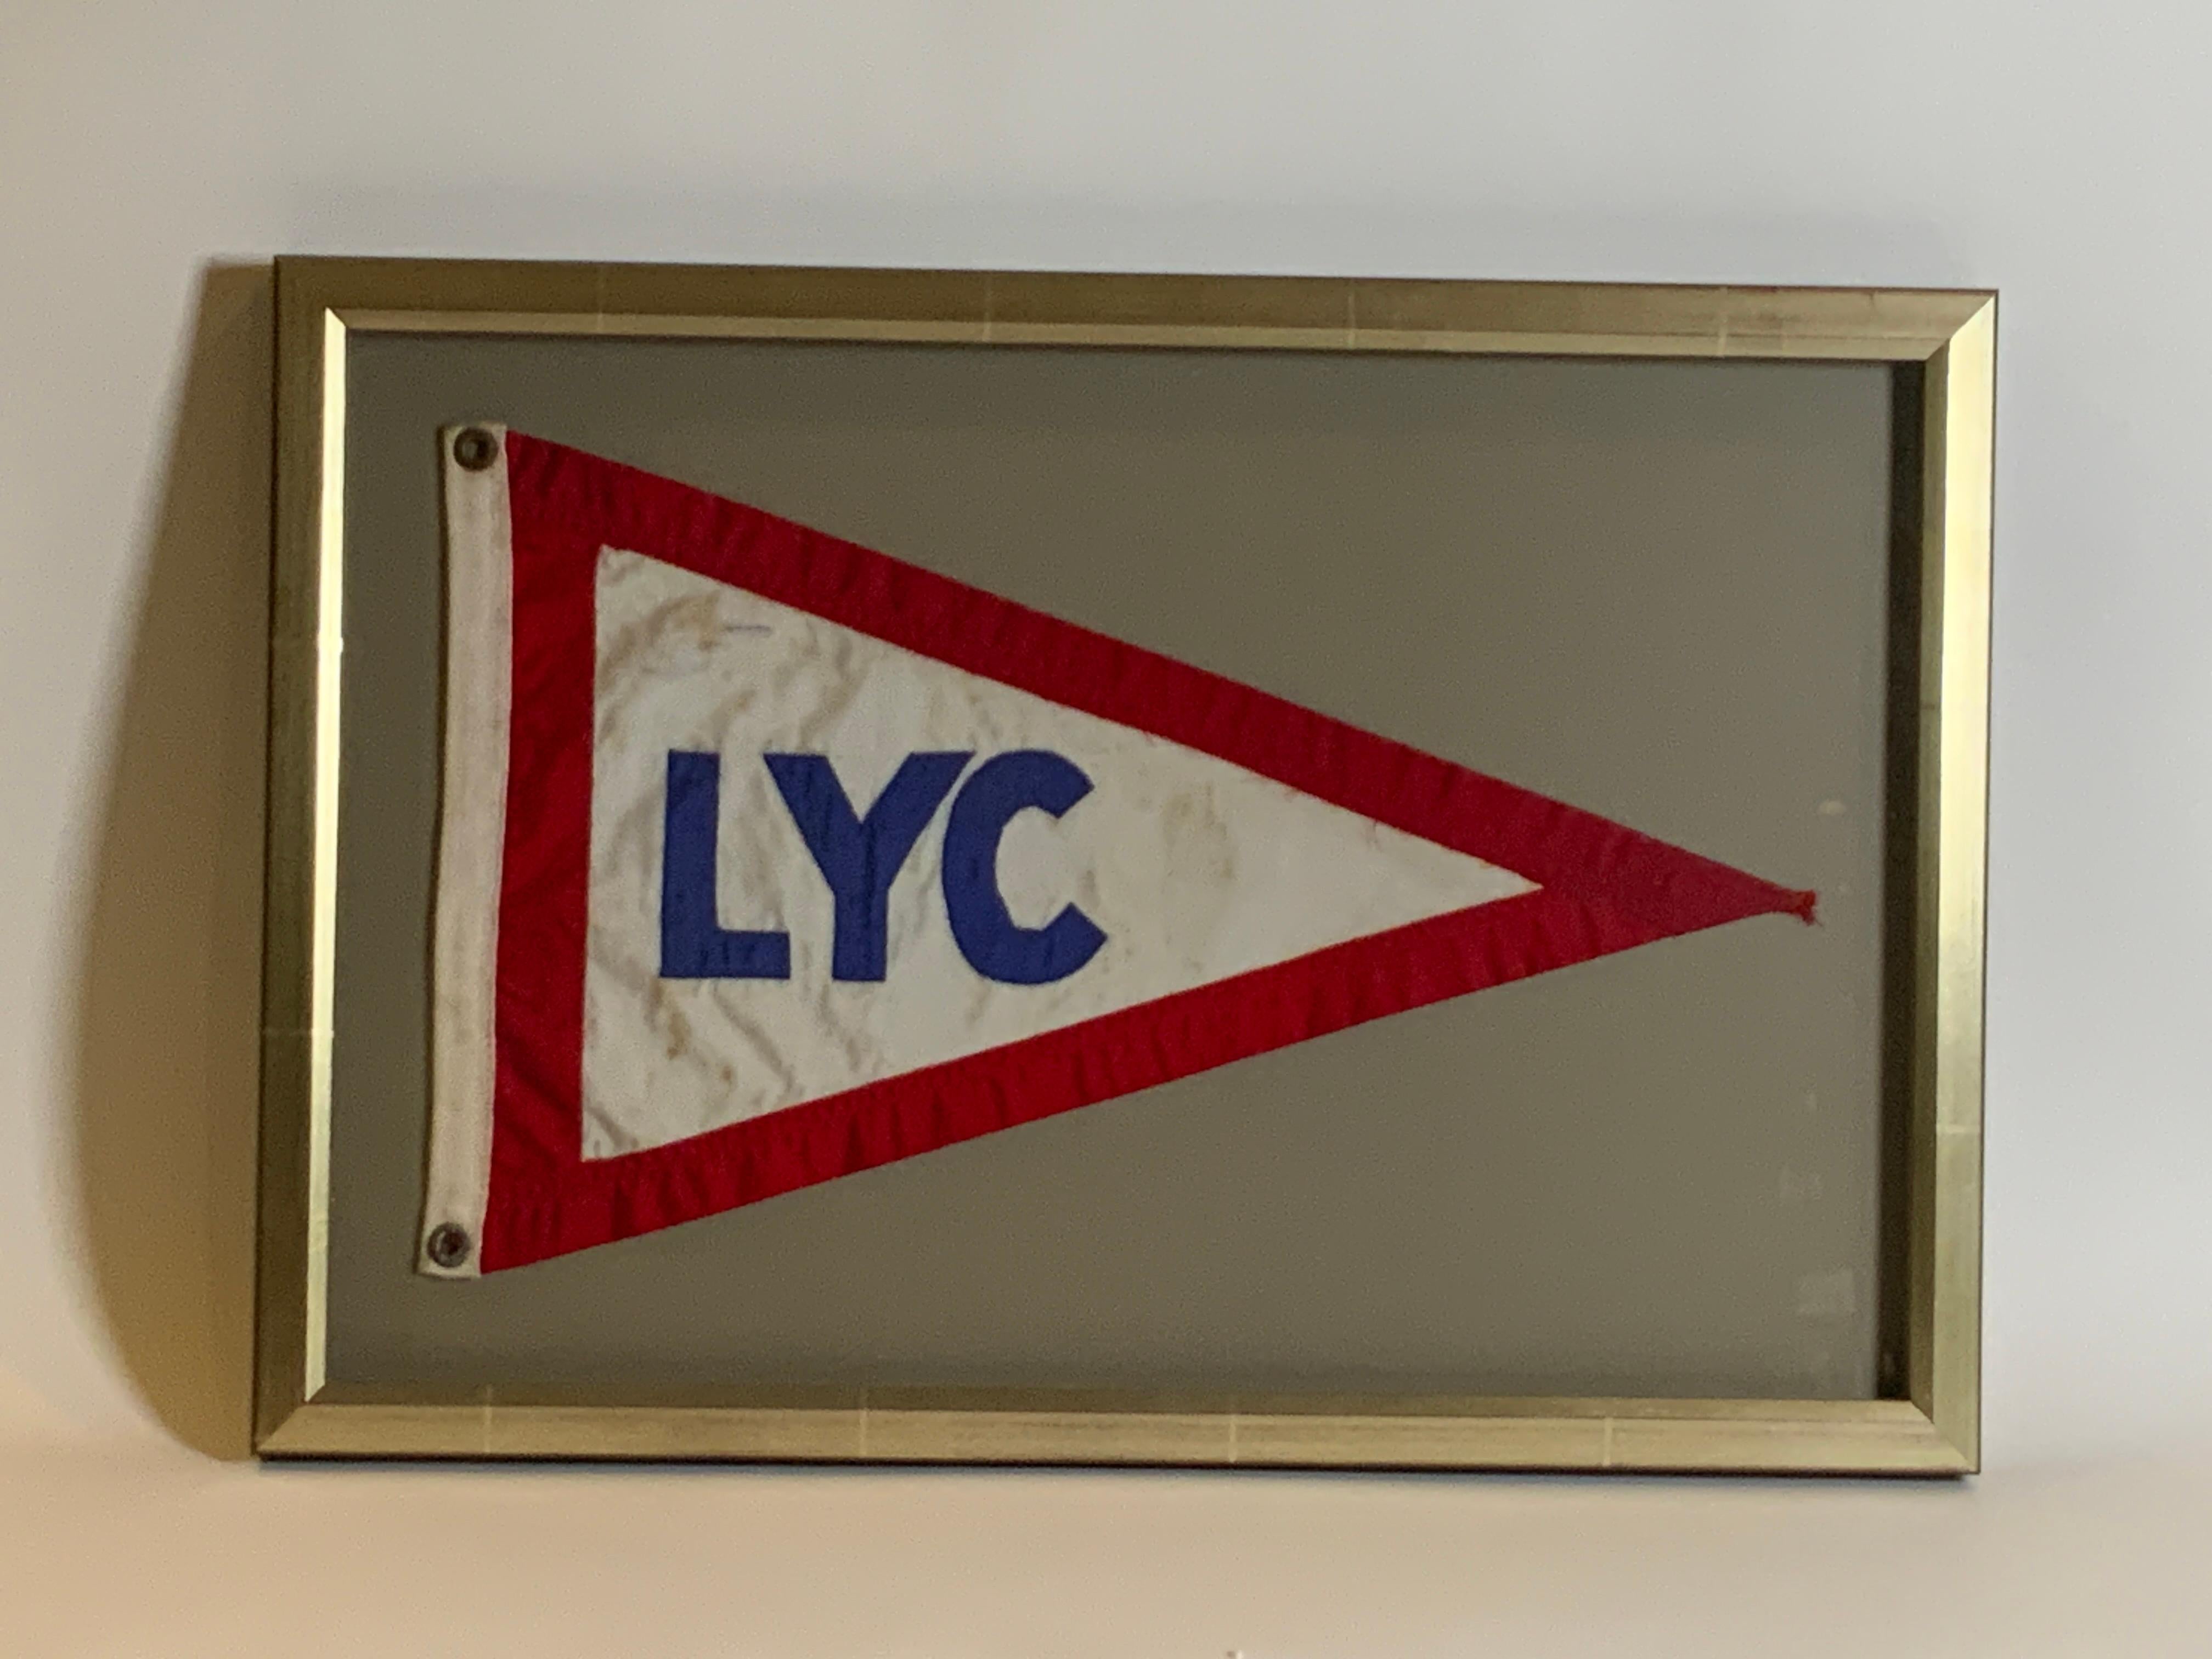 North American Vintage Lauderdale Yacht Club Framed Burgee For Sale